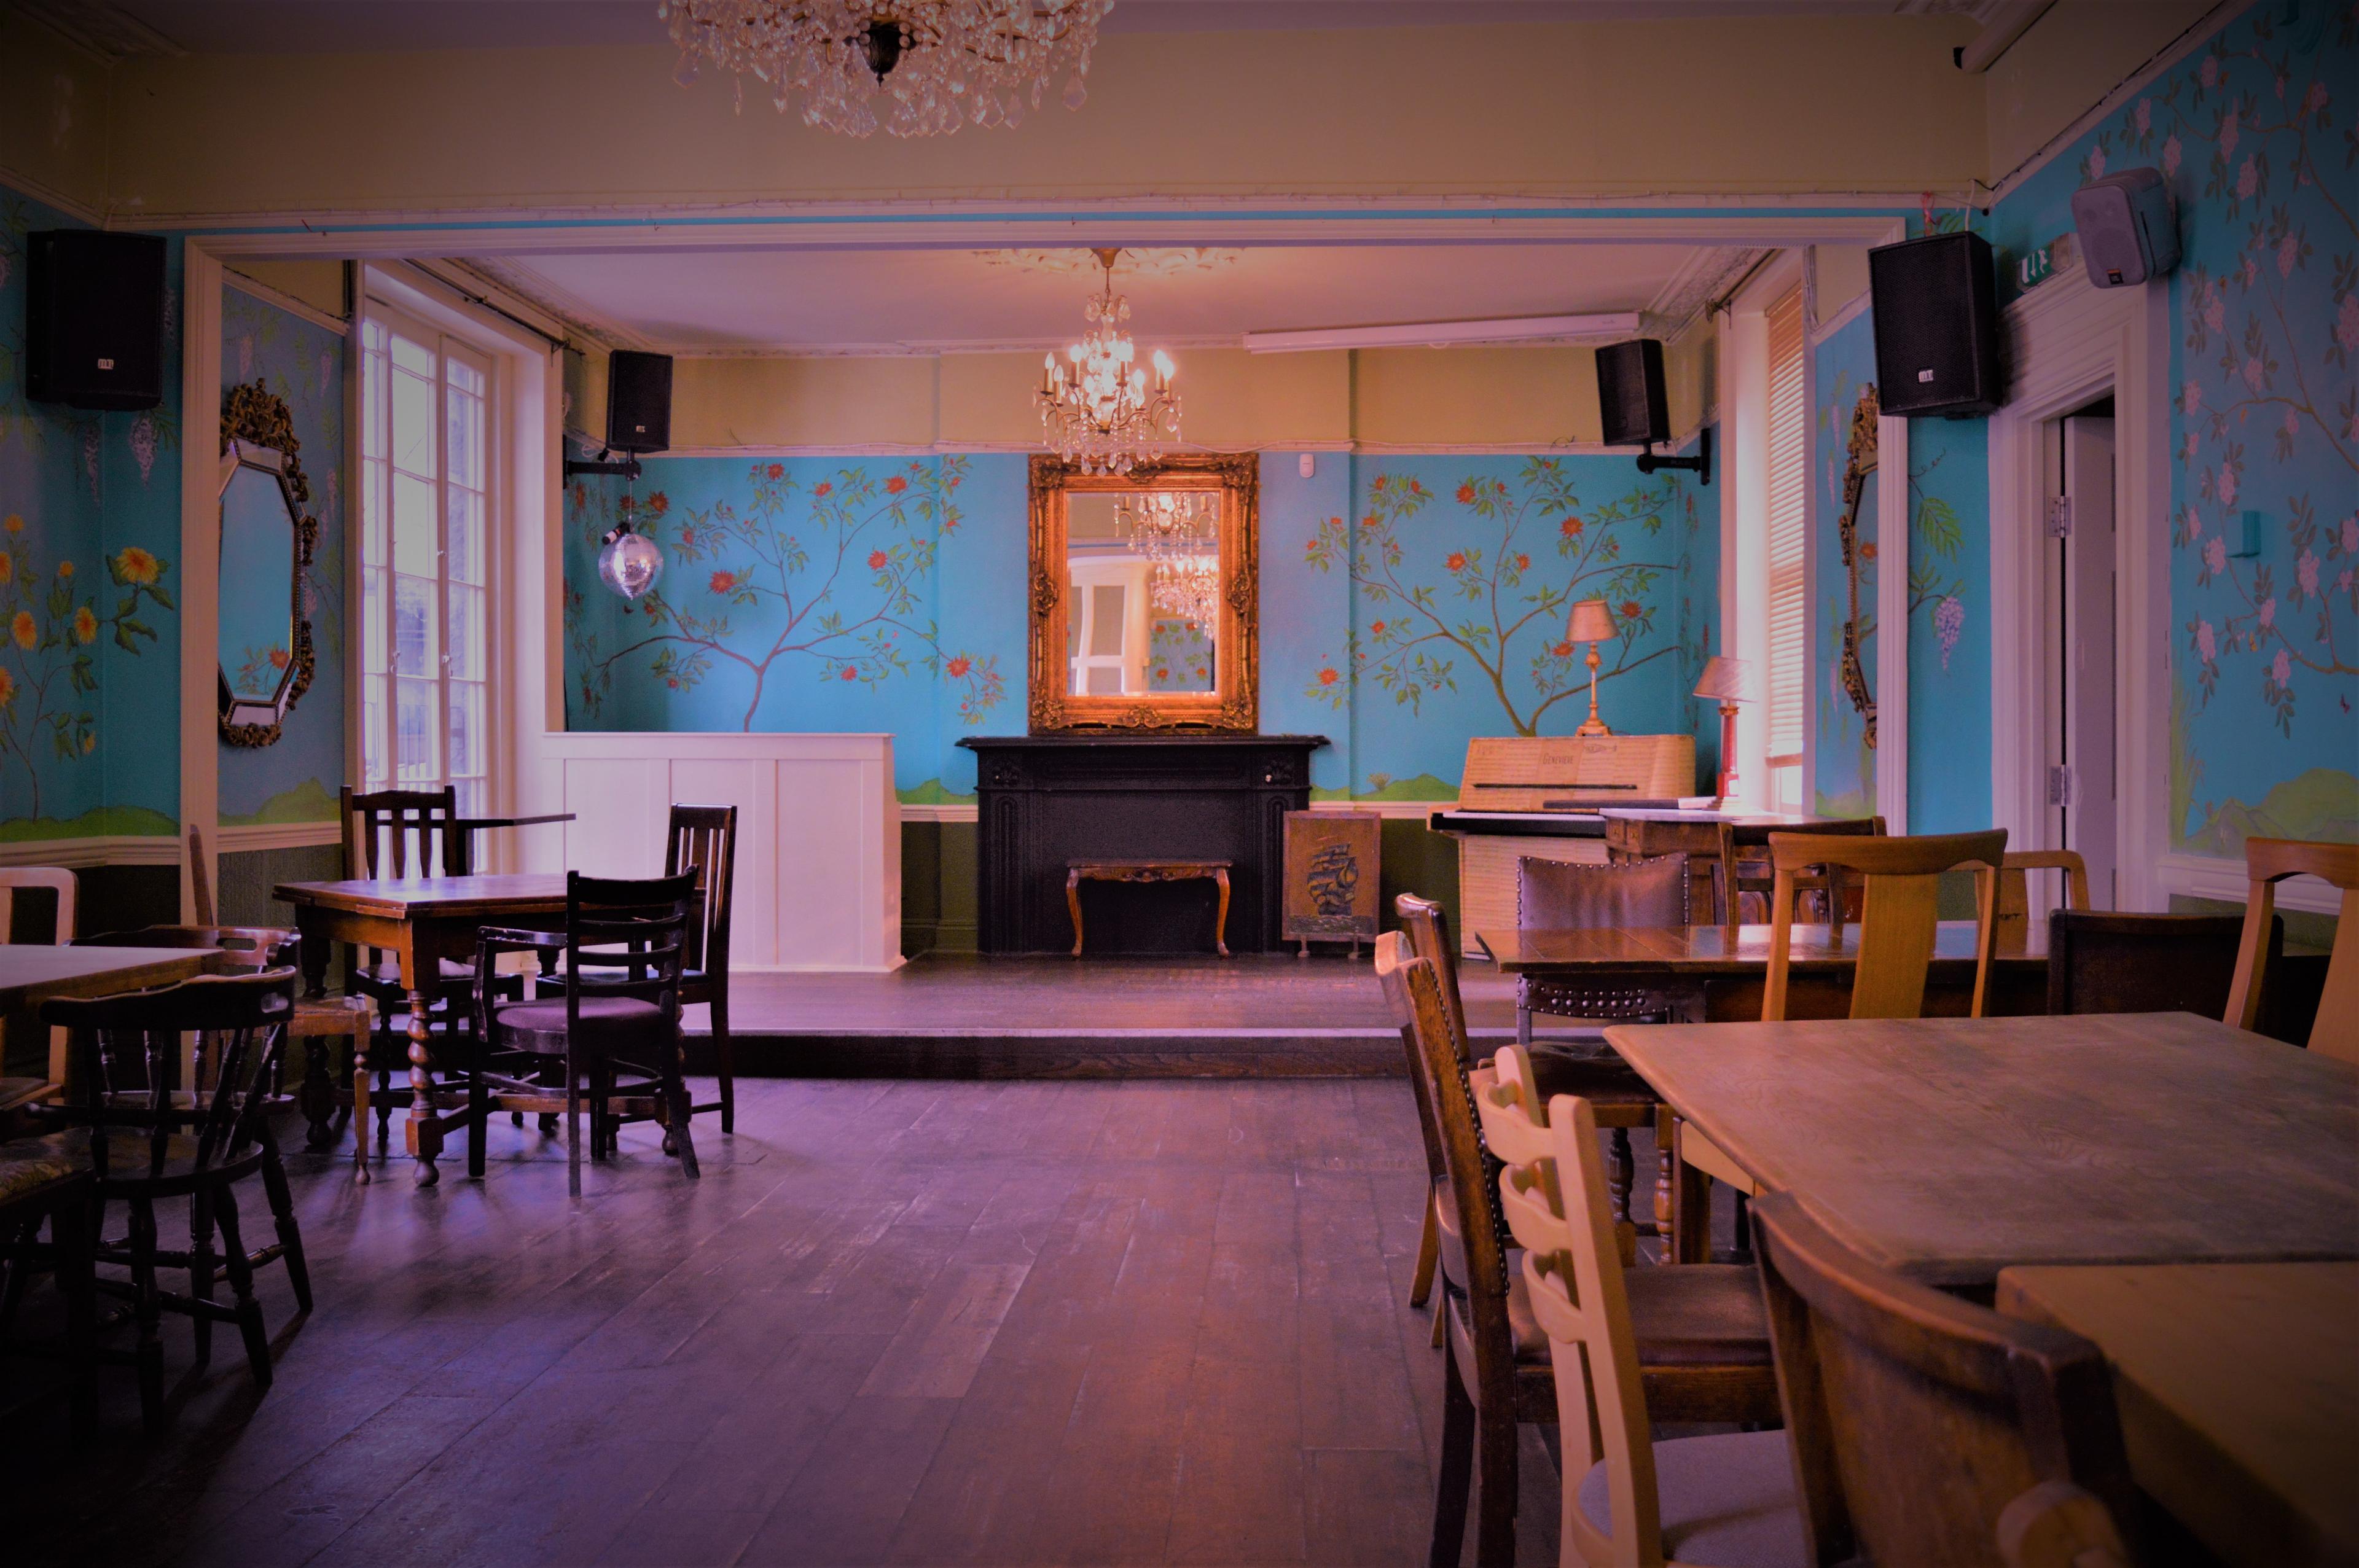 The Colonel Fawcett, Function Room photo #3